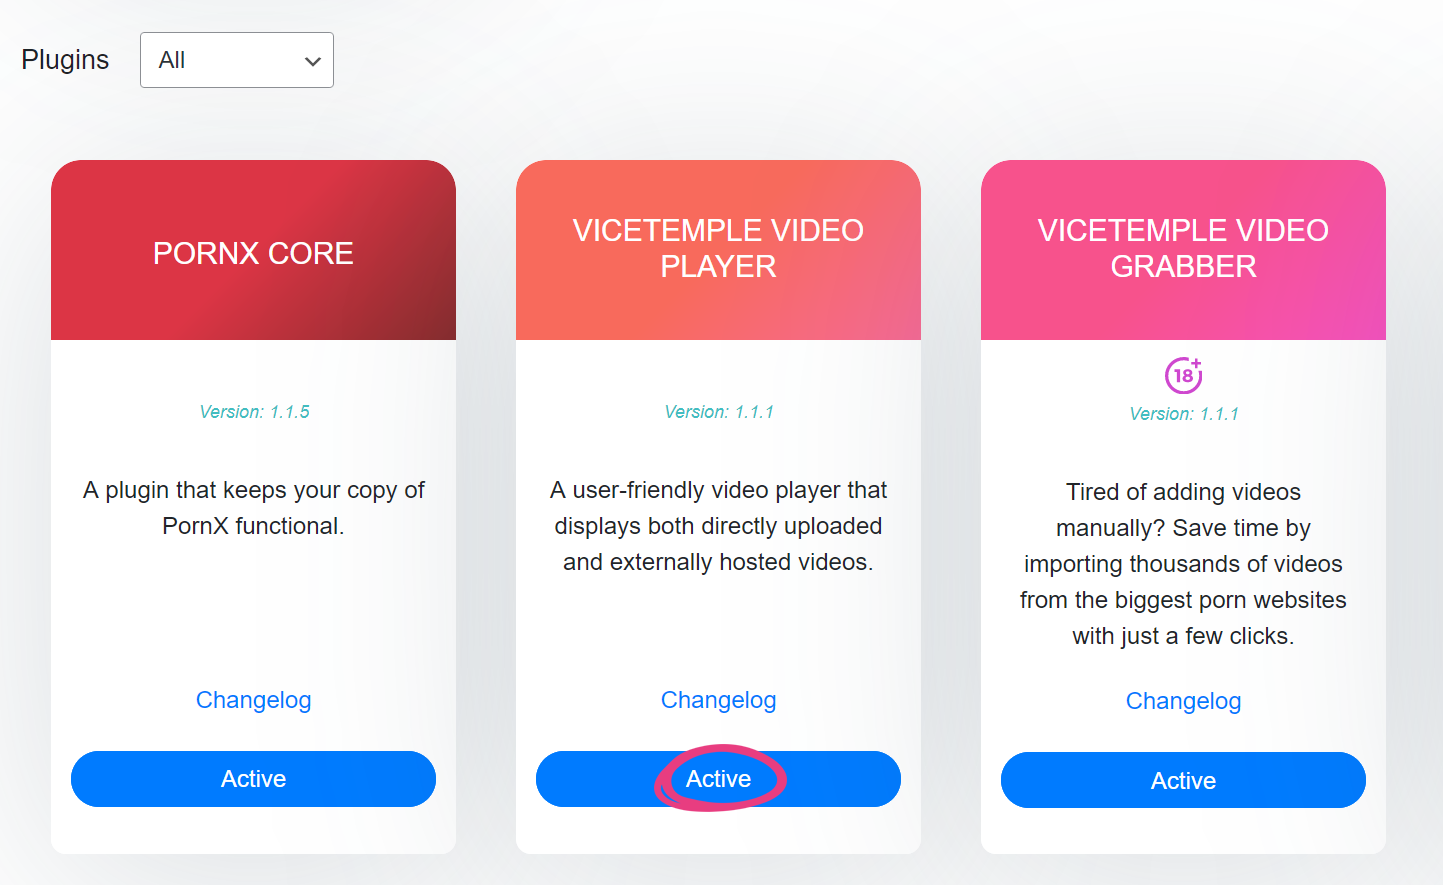 Vicetemple Video Player